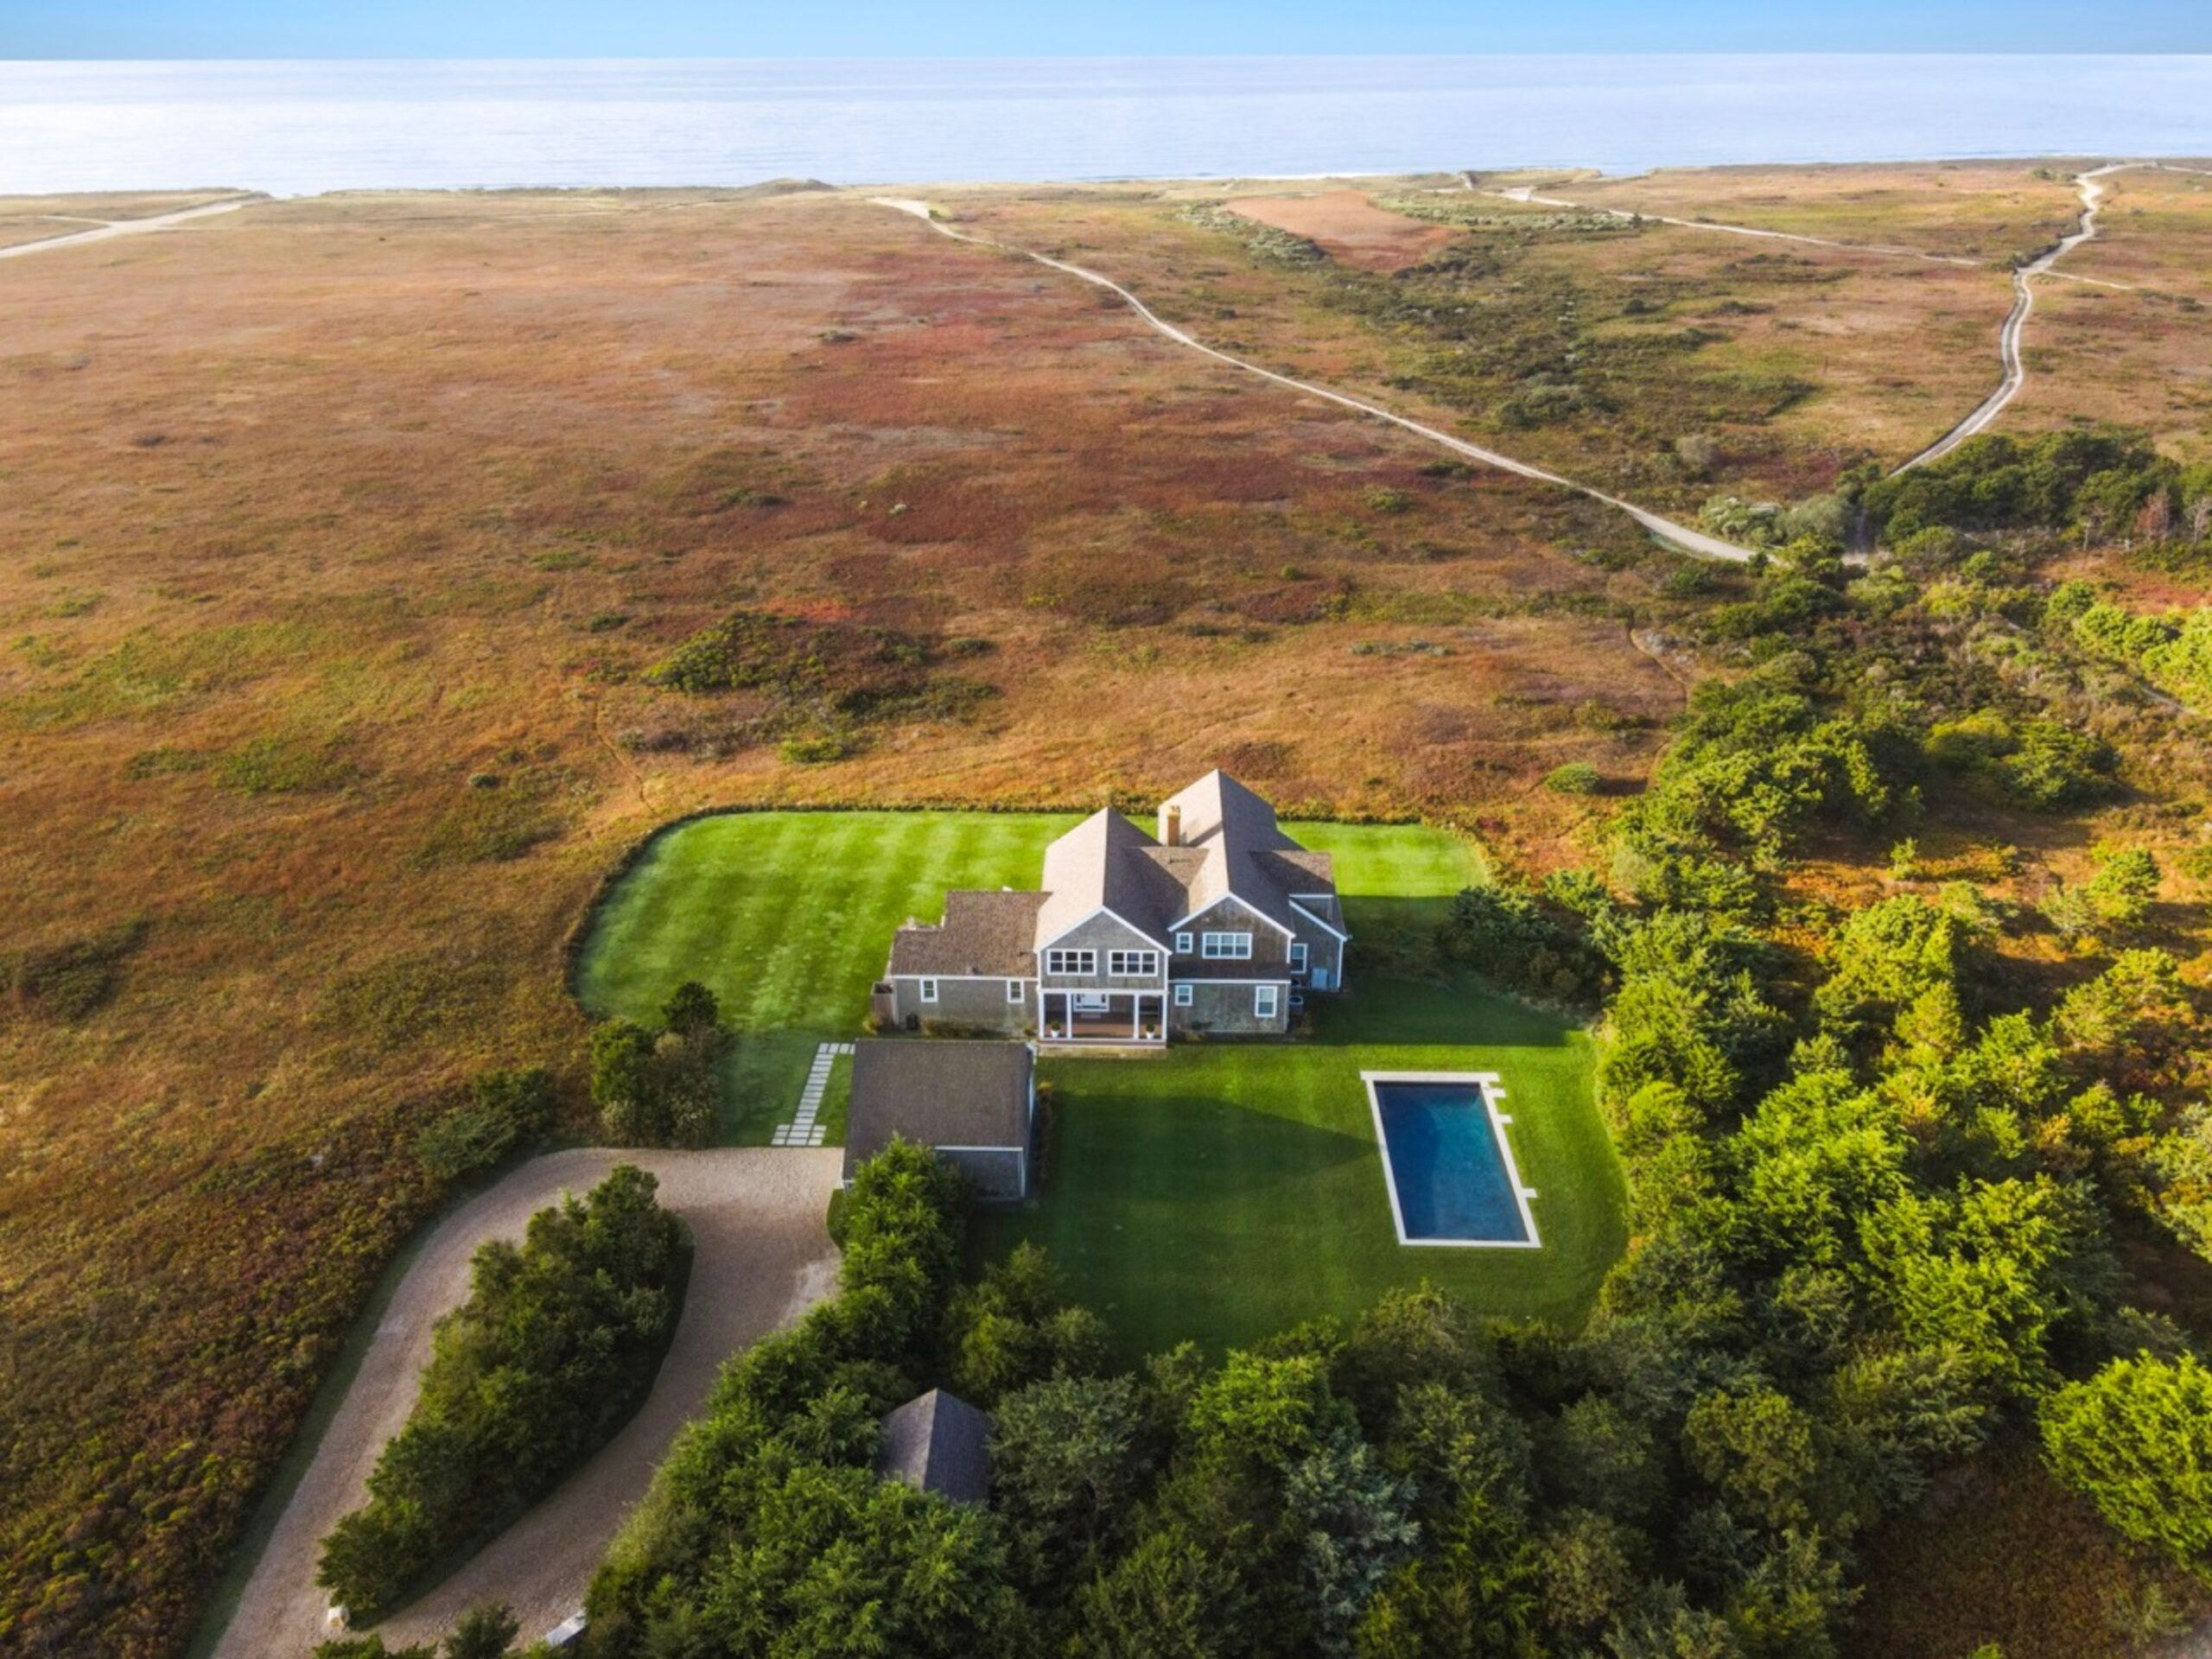 Aerial view of Nantucket property by drone photography experts.